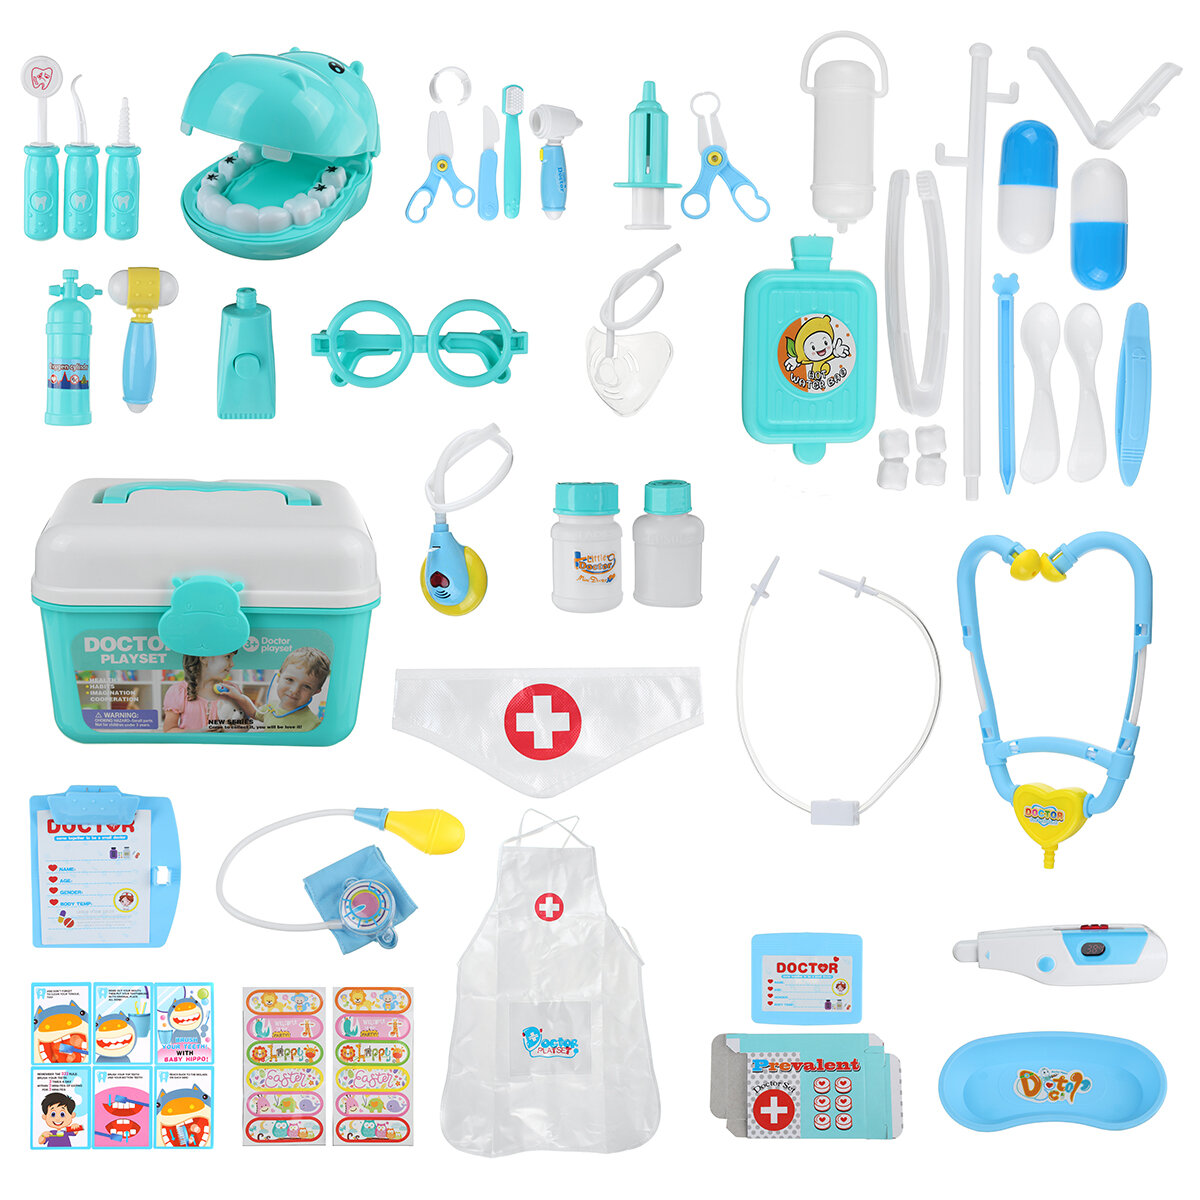 44pcs Children Play House Doctor Toy Set Simulation Medical Kit Injection Role Play Classic Toys for Children